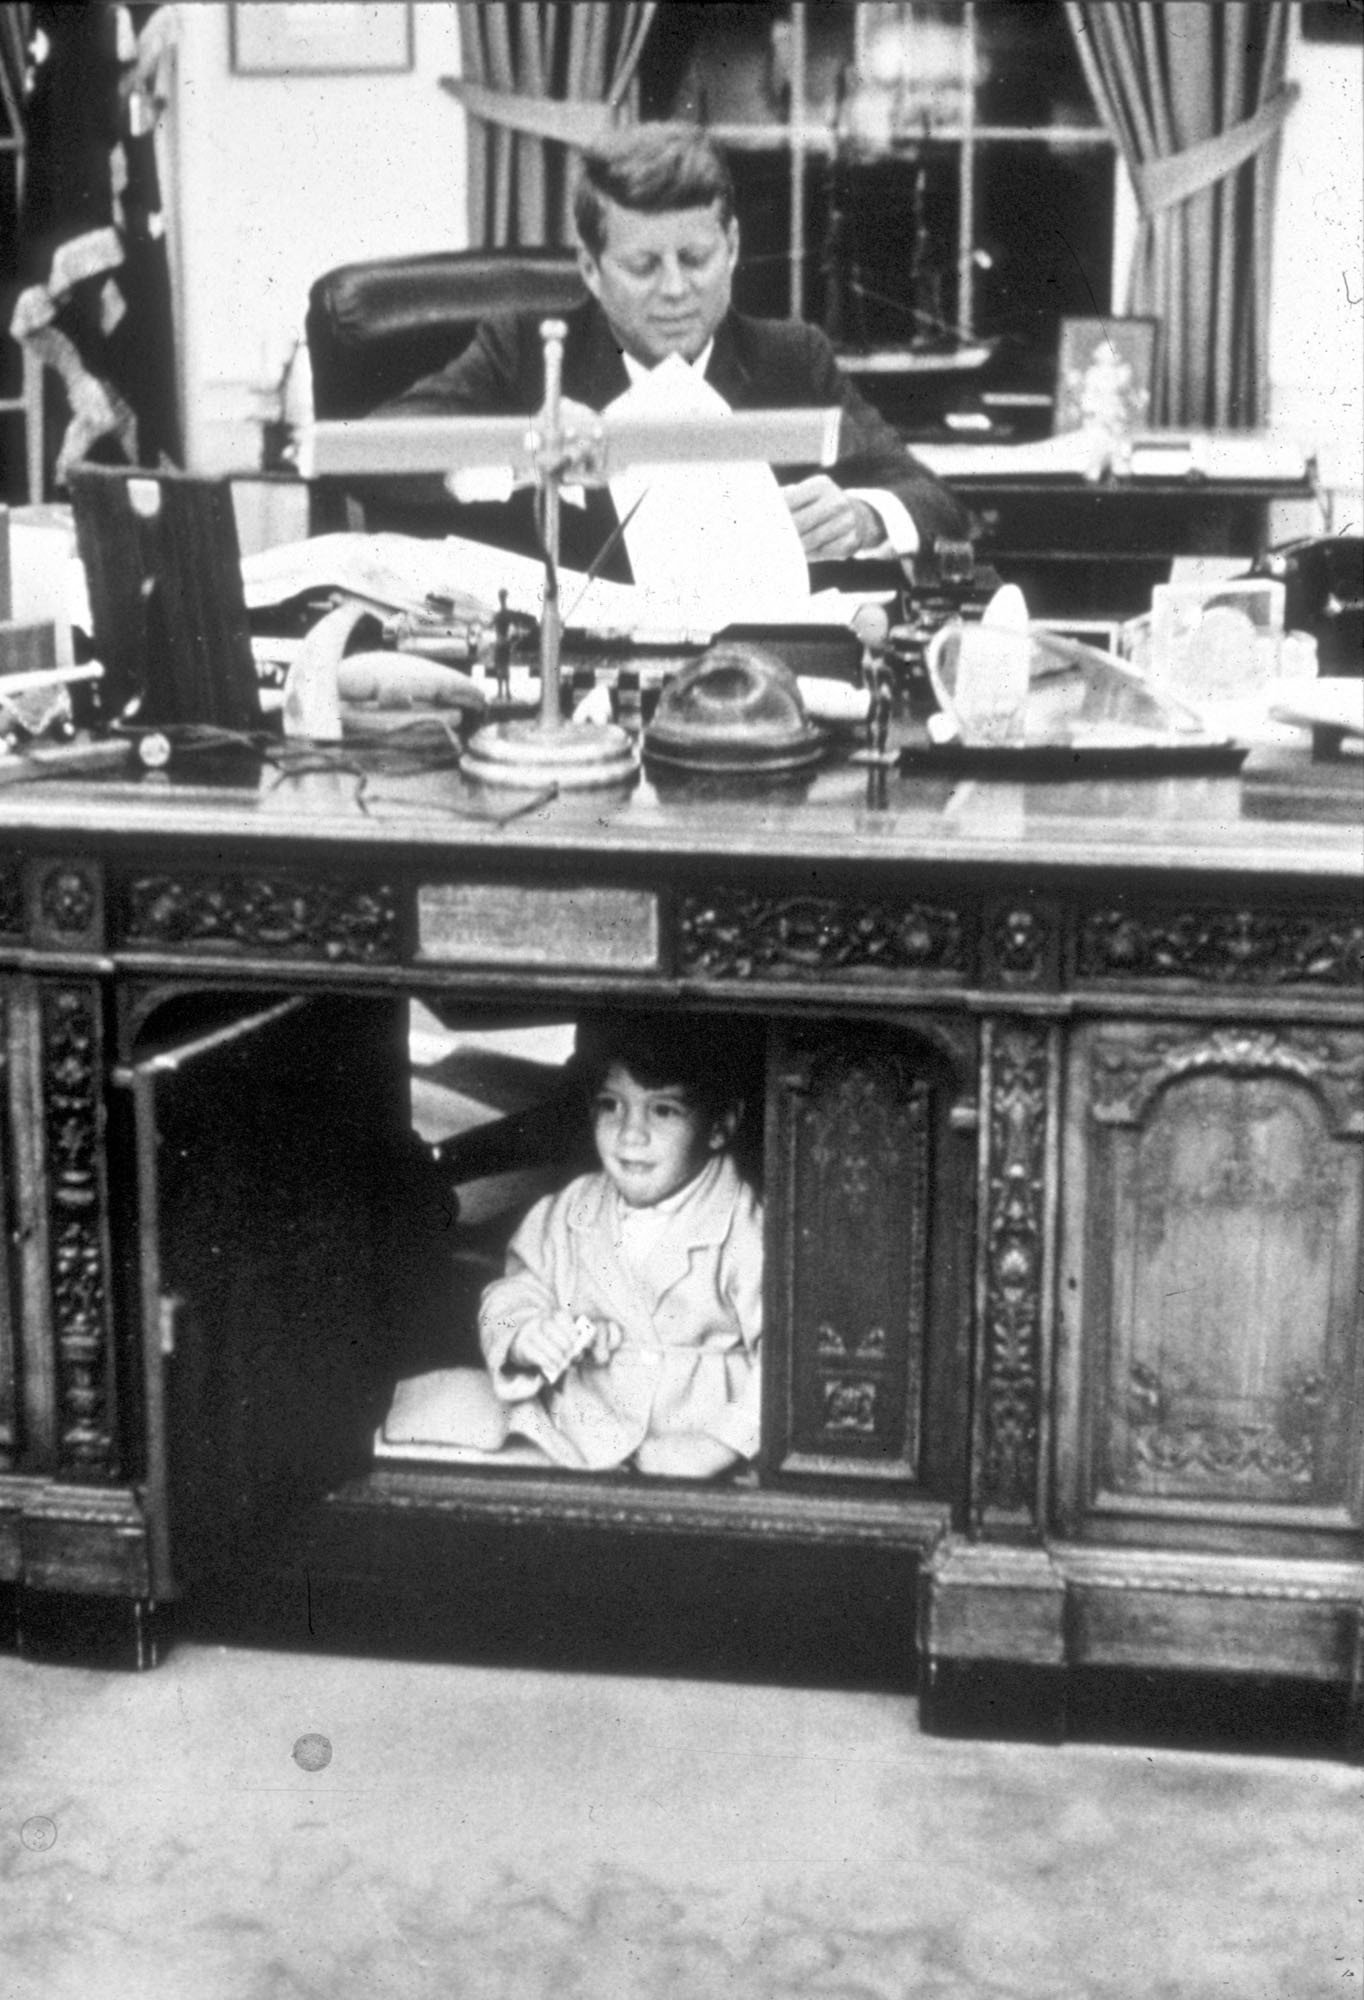 192021 01: John Kennedy Jr. playing in the Oval Office at the White House, Washington, DC, October 15, 1963. (Photo by Liaison Agency)